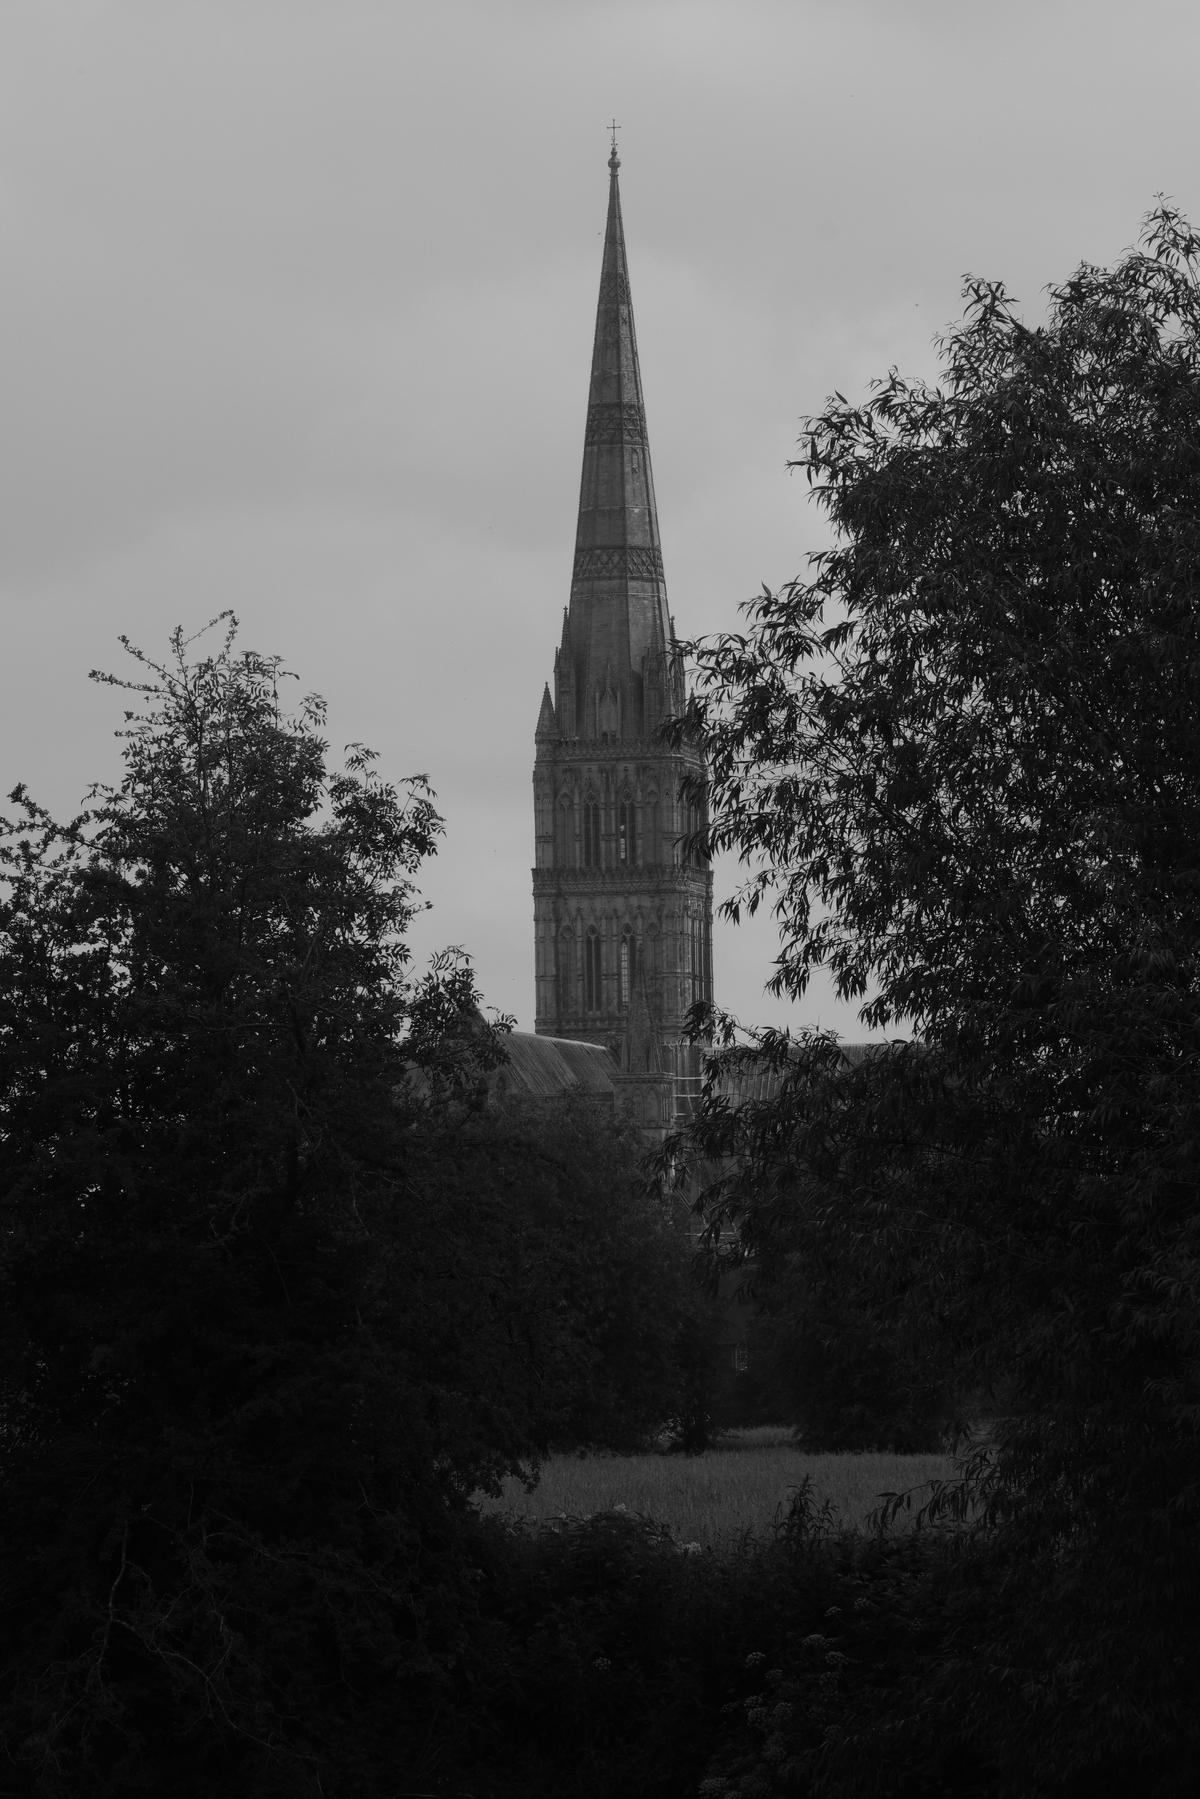 The magnificent Salisbury Cathedral peers out from behind the greenery